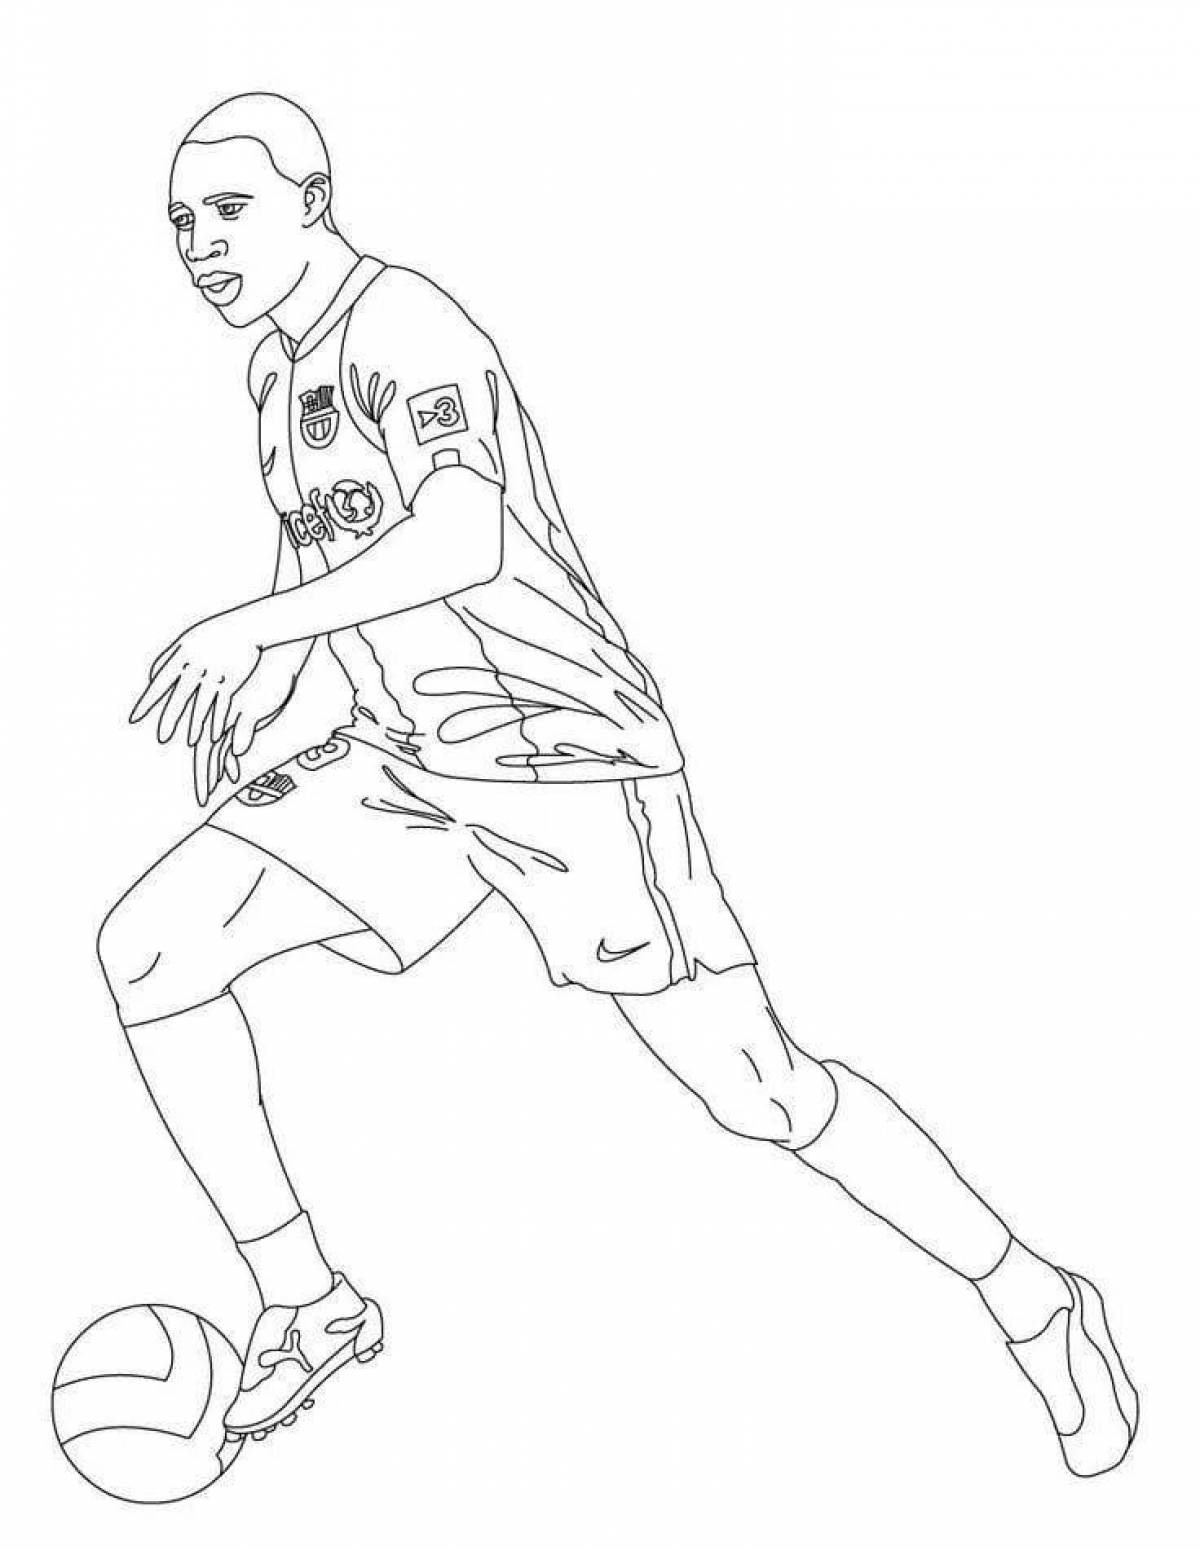 Animated soccer player coloring page